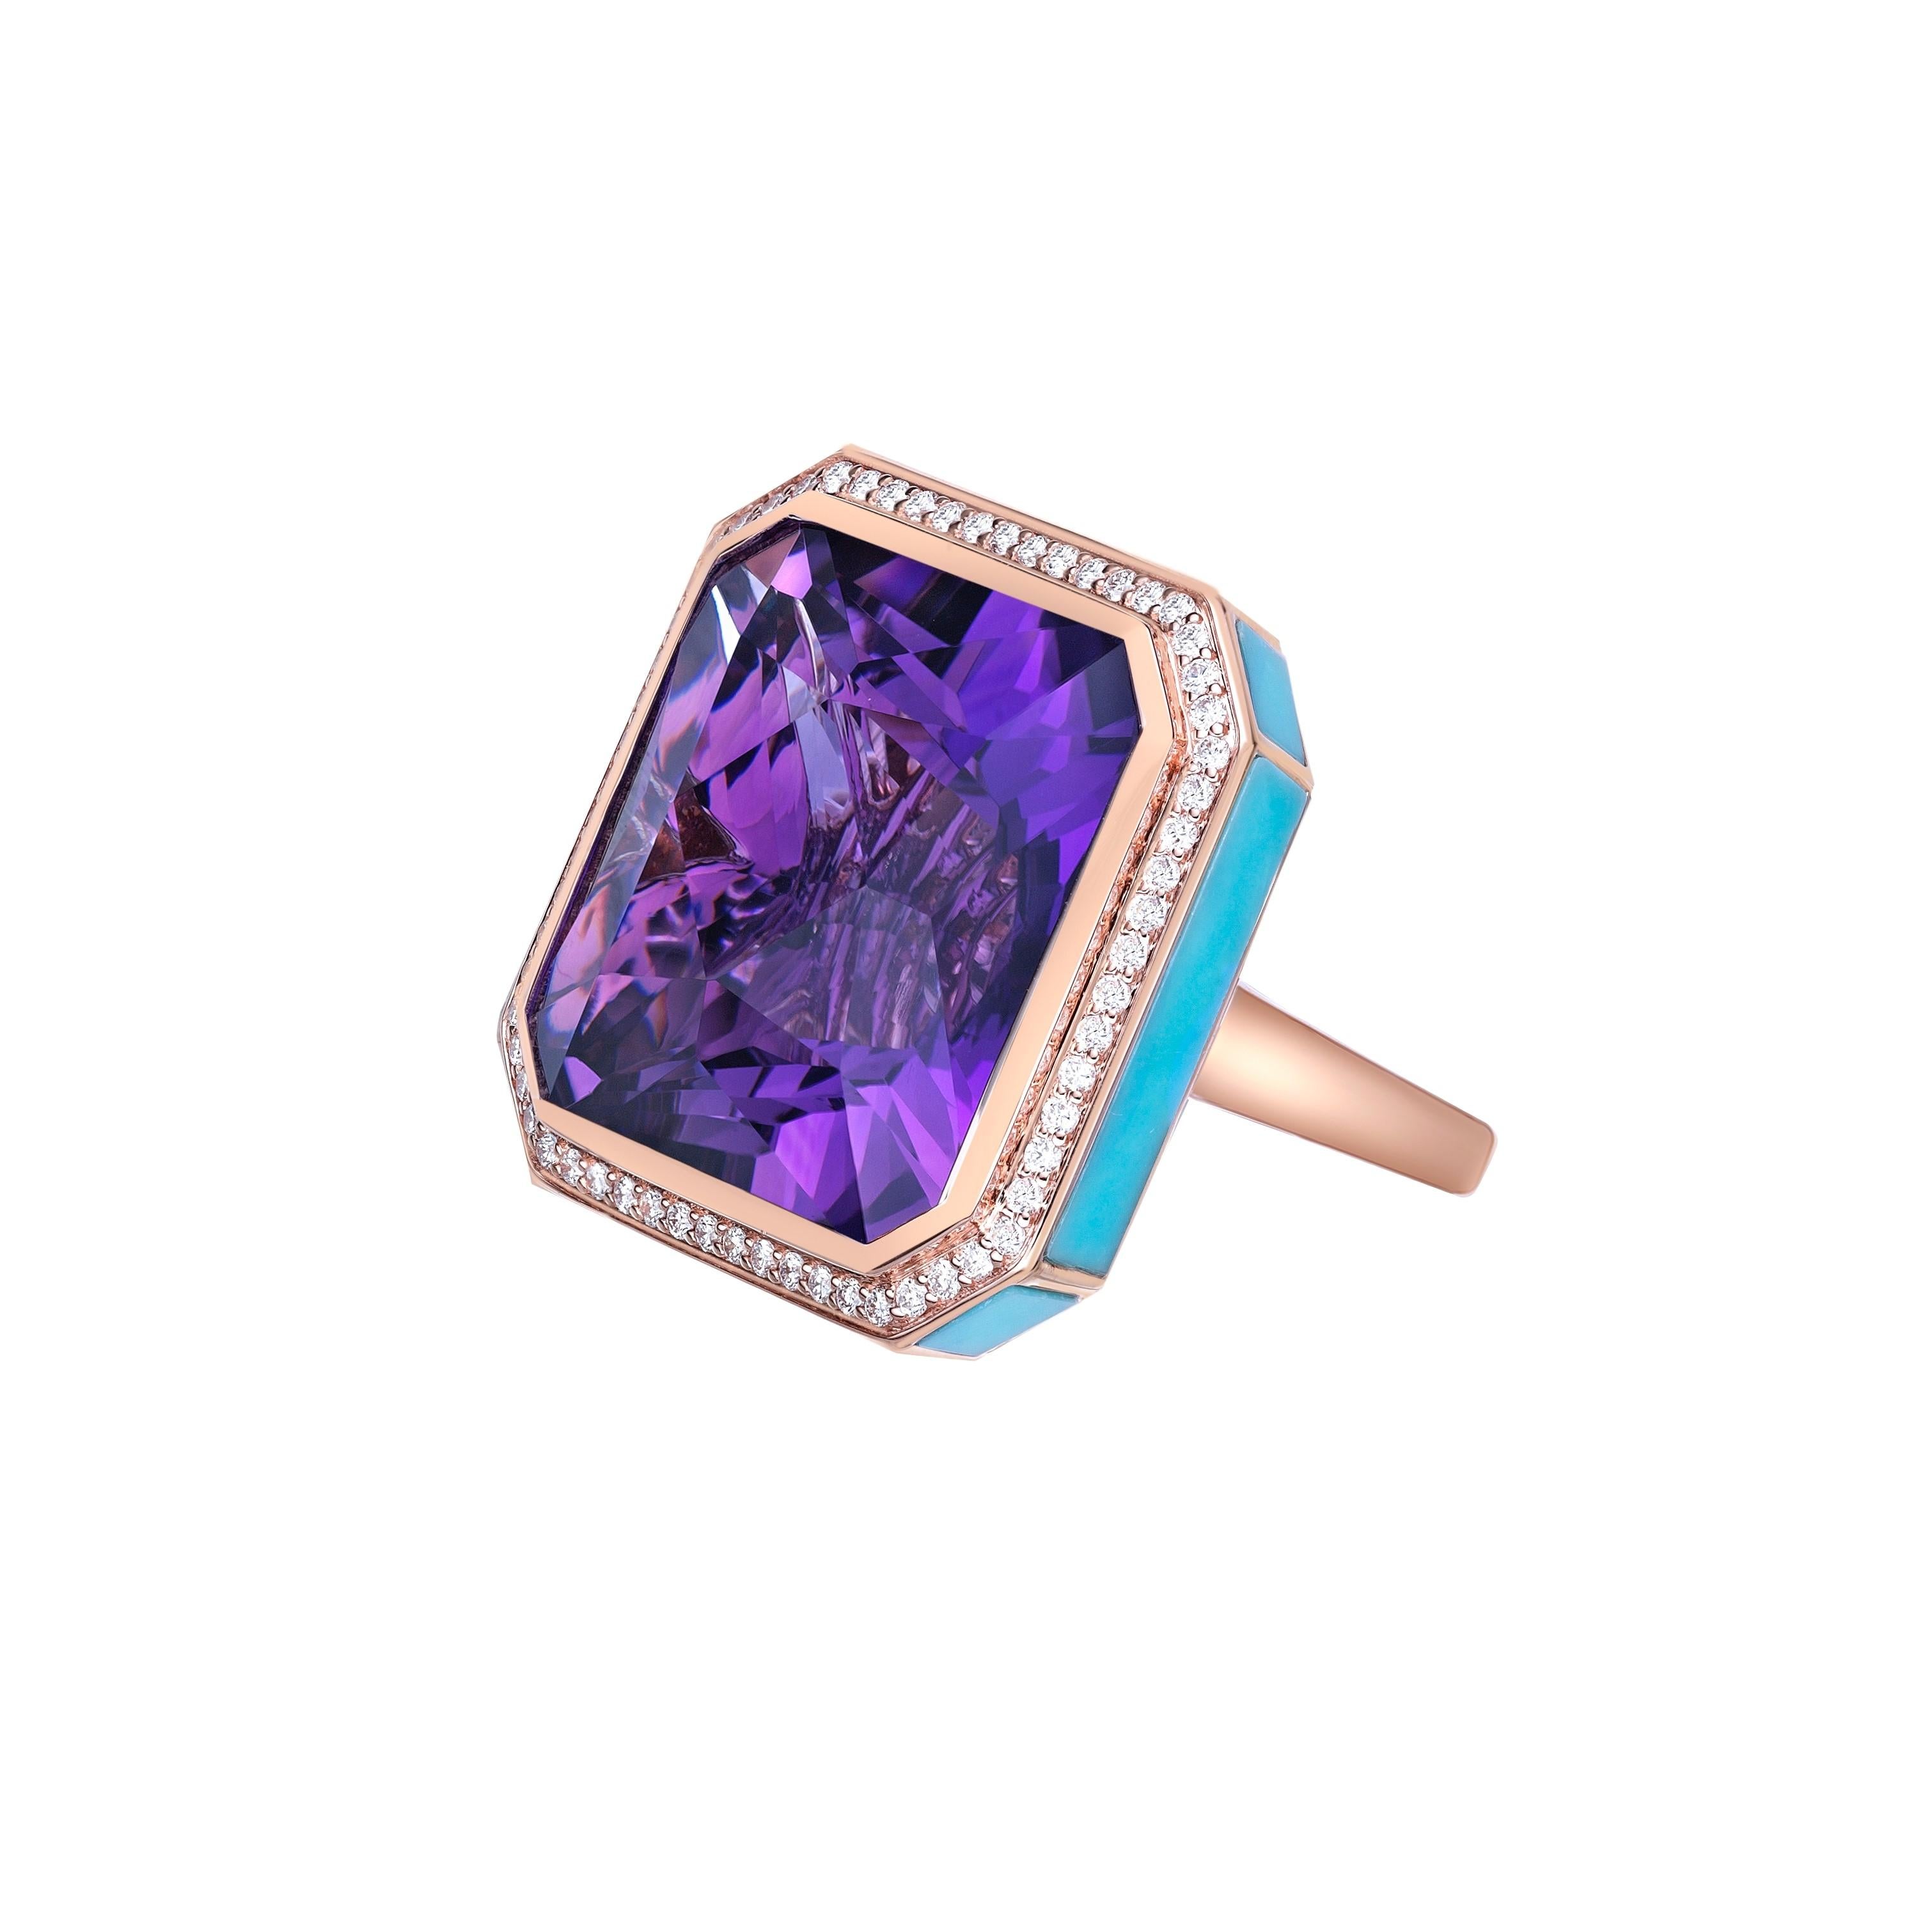 Octagon Cut 31.26 Carat Amethyst Fancy Ring in 18KRG with Turquoise, Garnet and Diamond. For Sale